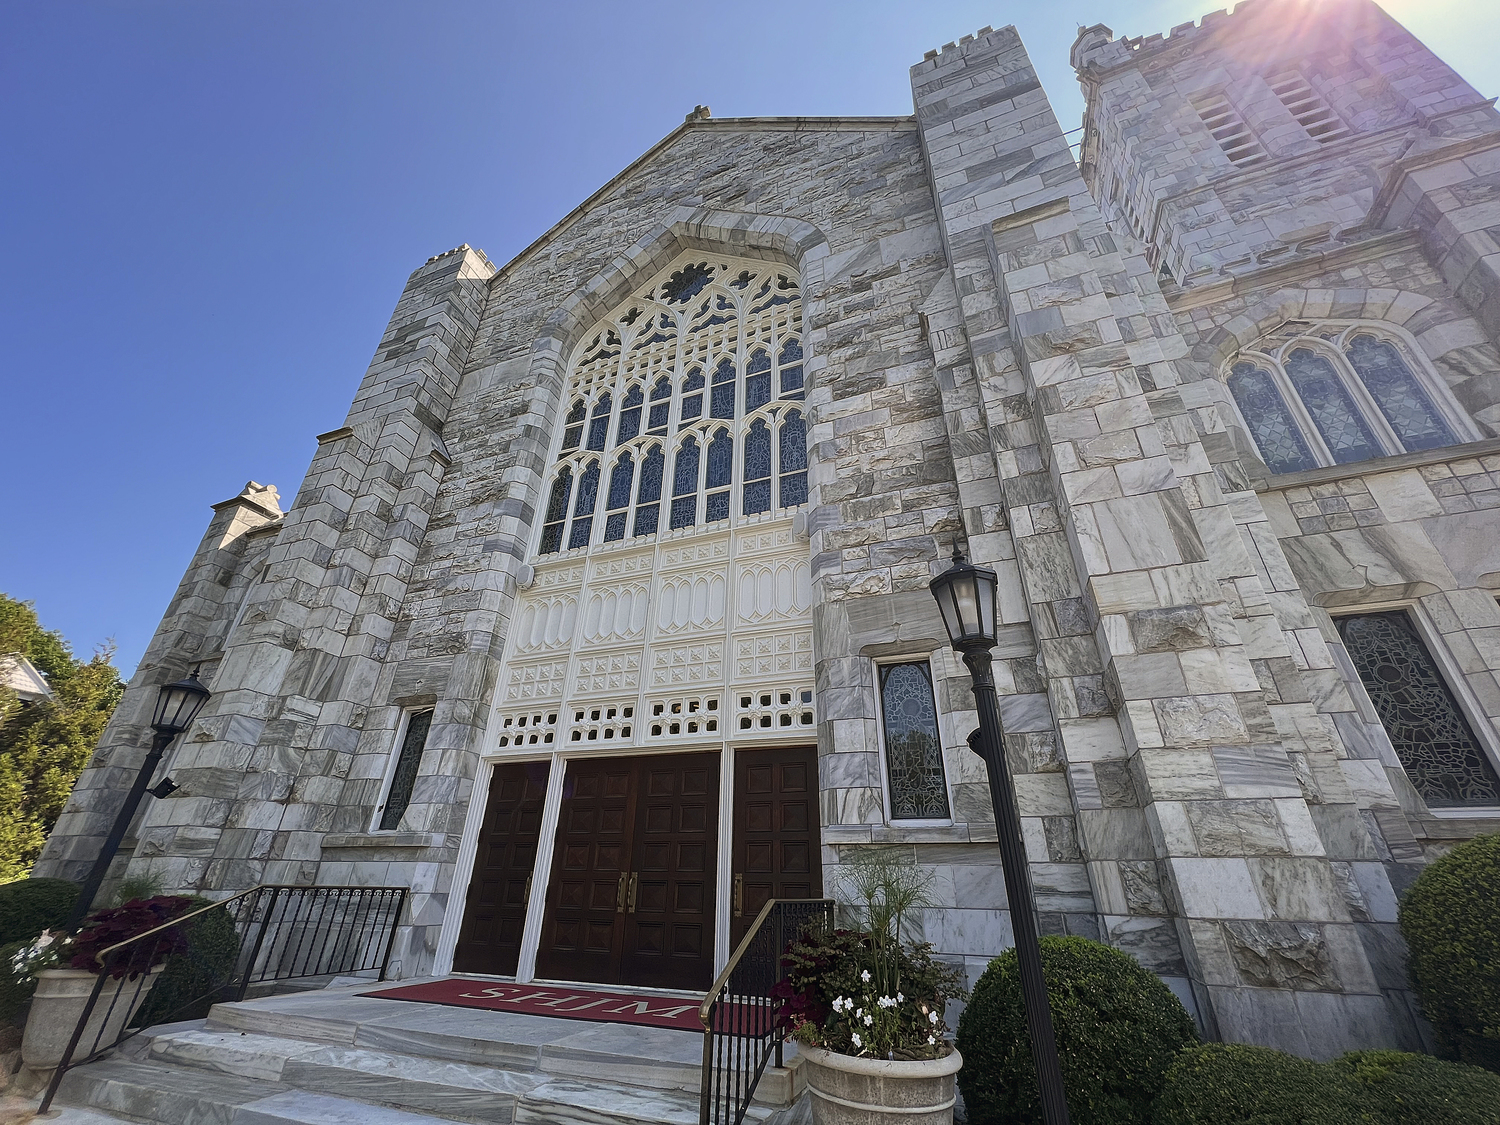 The Basilica Parish of Sacred Hearts of Jesus and Mary in Southampton Village received a $15,000 Sacred Sites grant from the Robert David Lion Gardiner Foundation to repair the front stained glass window.   DANA SHAW